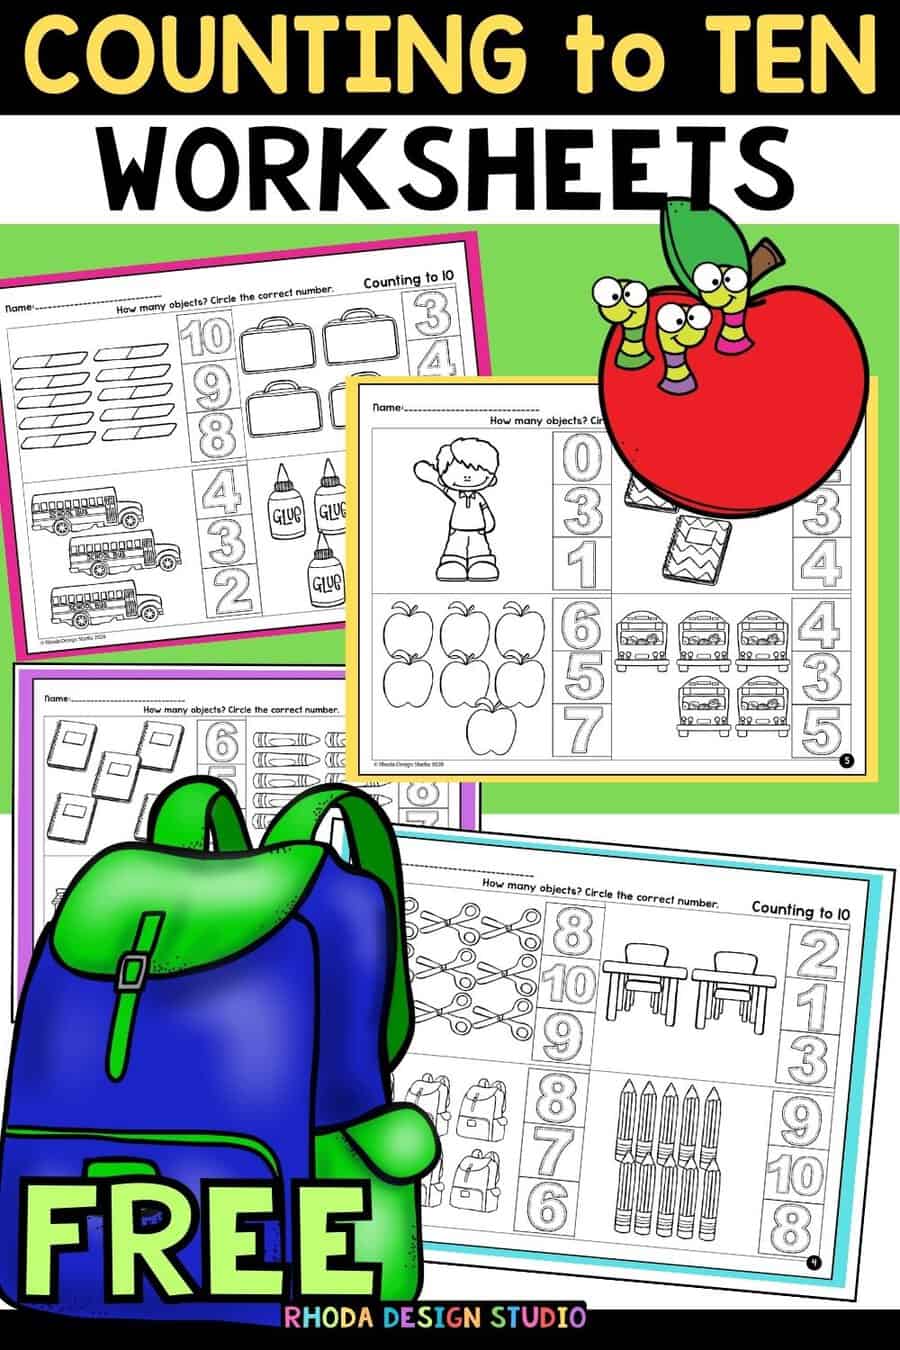 Teach your little ones how to count to 10 with these free worksheets. Grab your school supplies and start learning today! #countingto10 #freeworksheets #educationalactivities